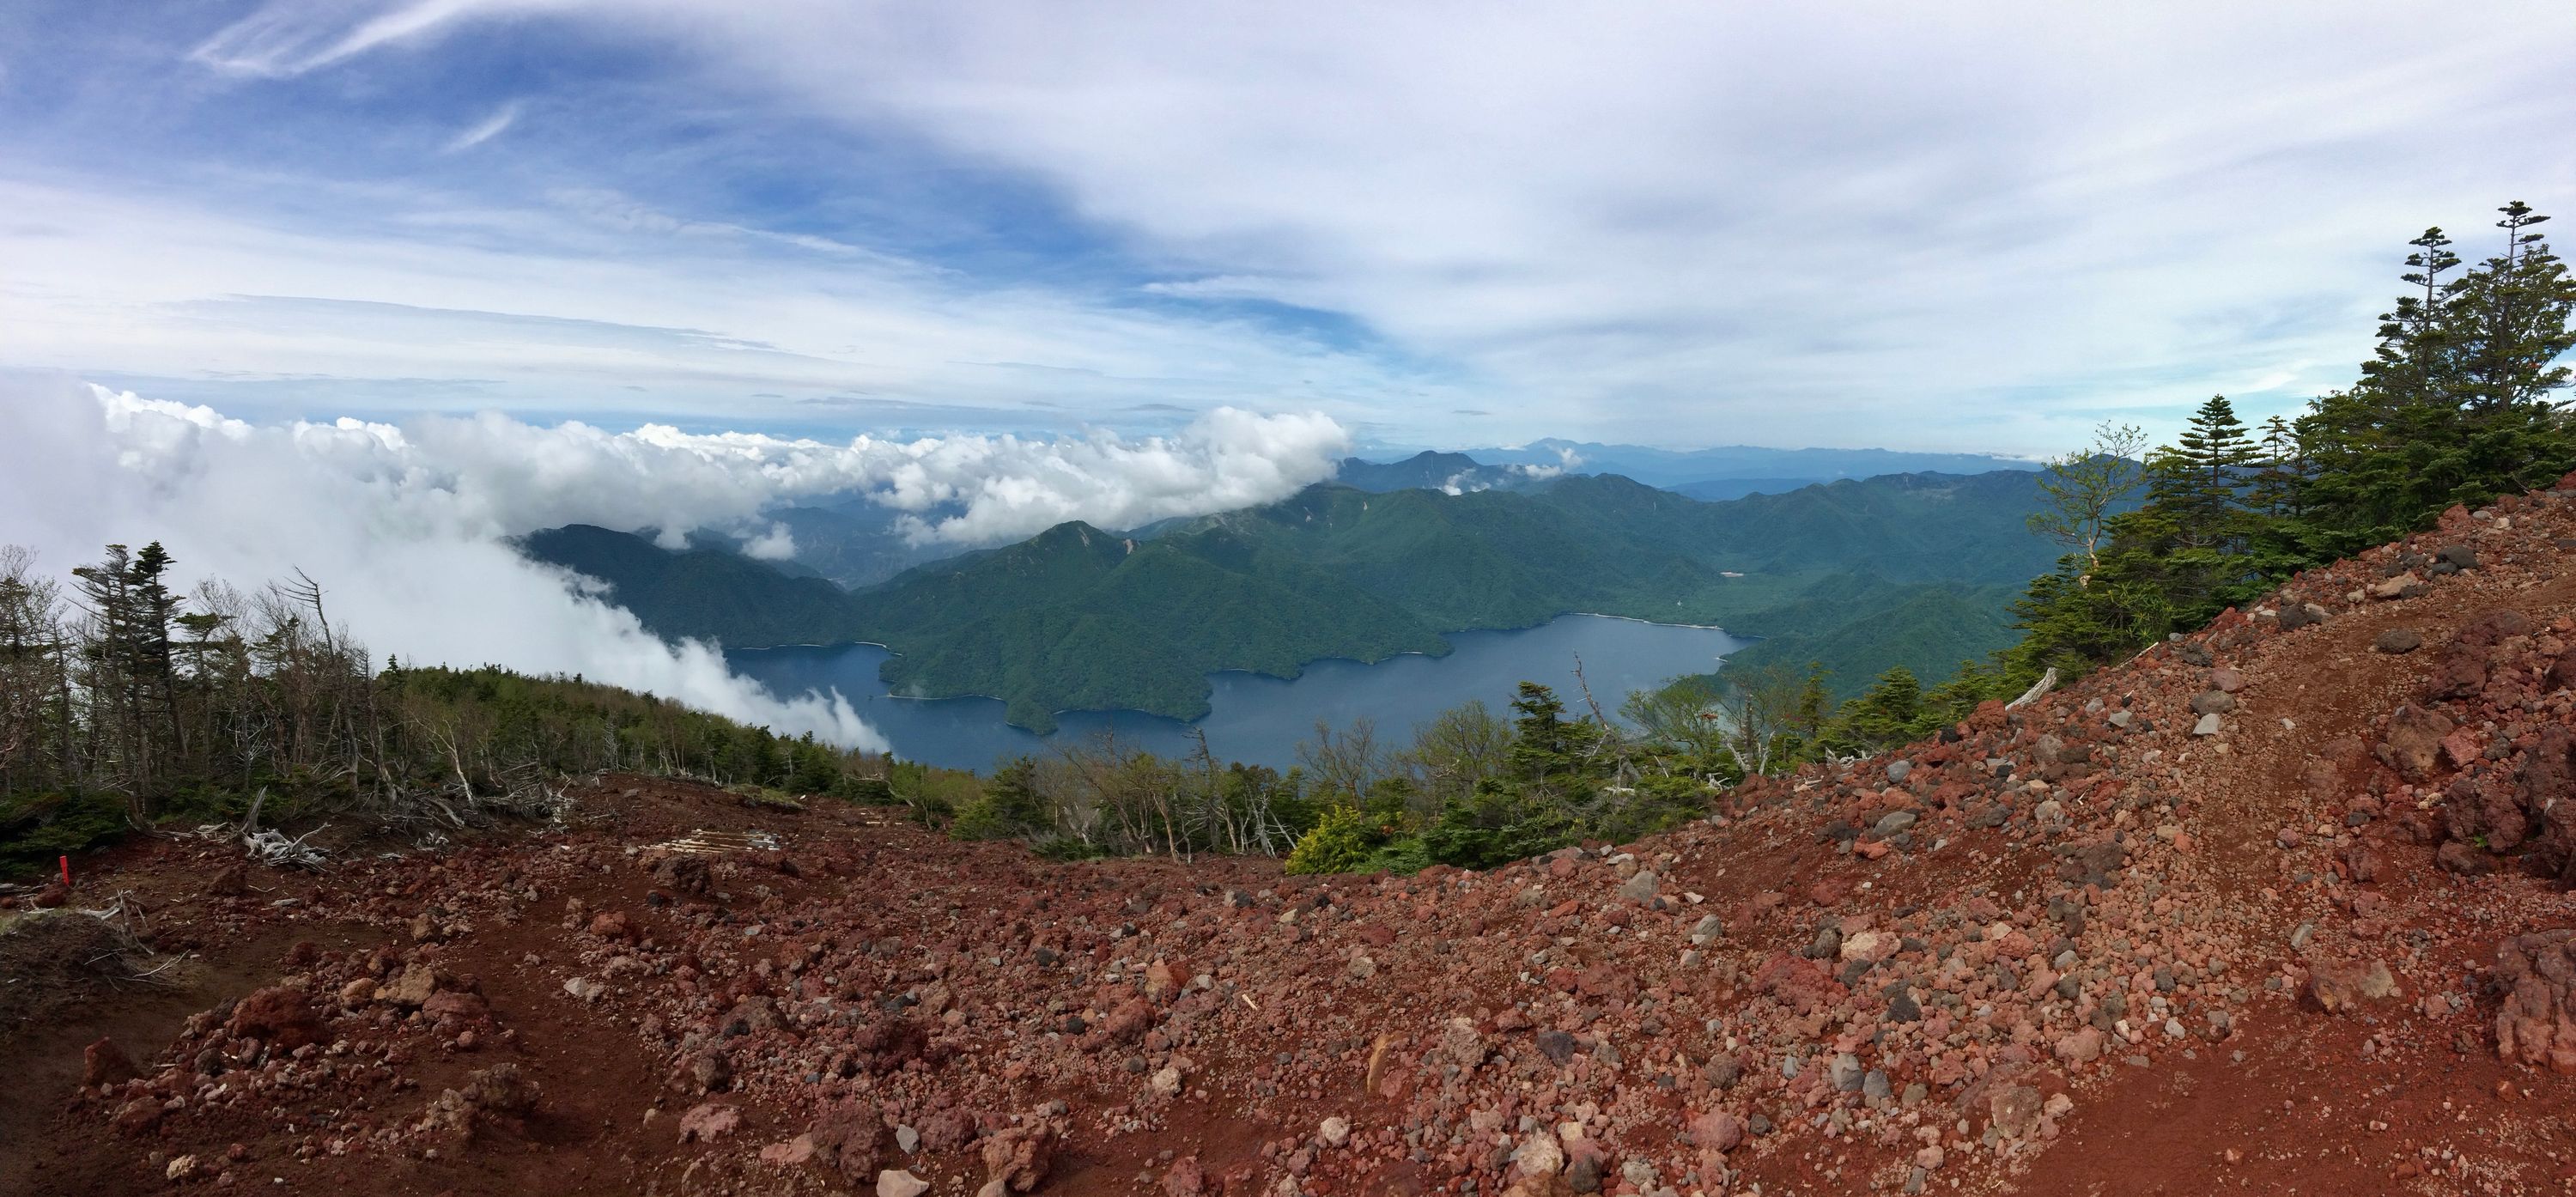 A panorama of the Lake Chūzenji area from the summit of Mount Nantai.